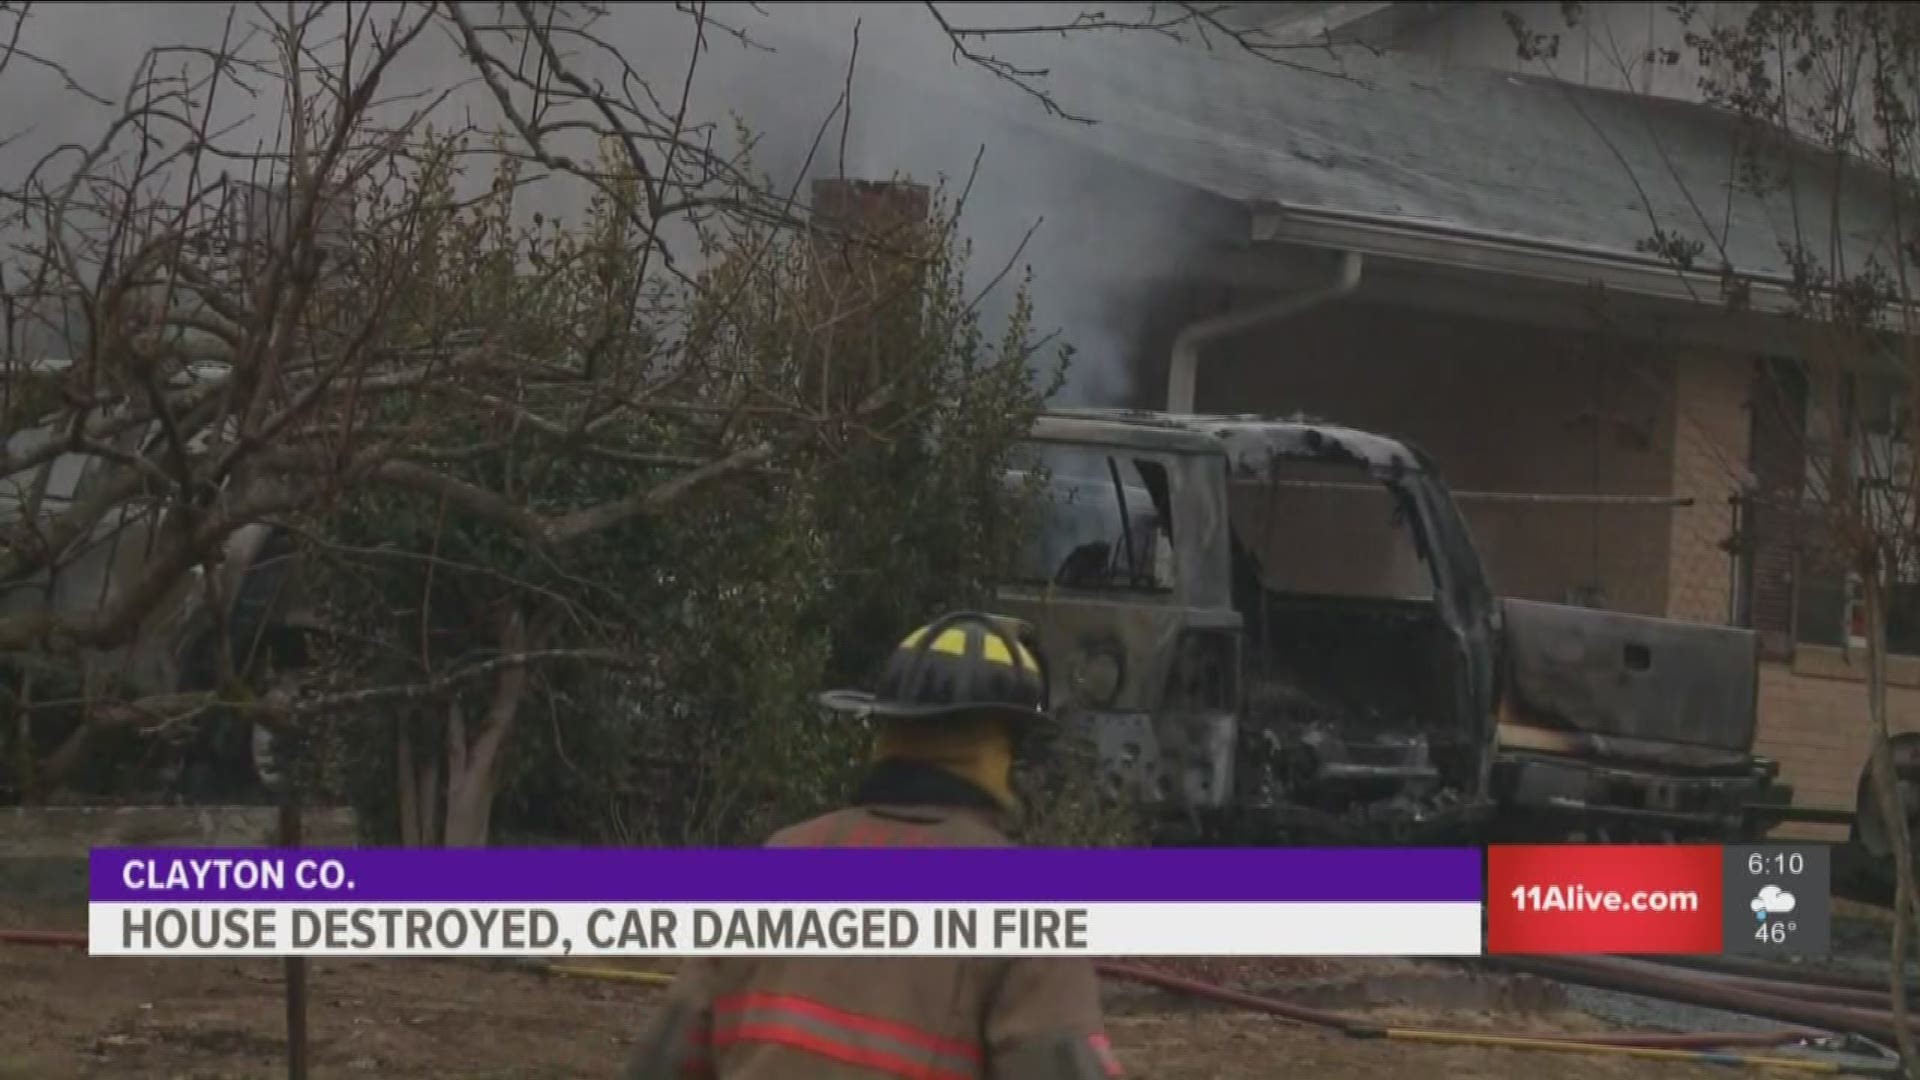 Crews said the fire started around 6:30 a.m. on Pineglen Drive in Clayton County. The fire damaged the entire house and a car.